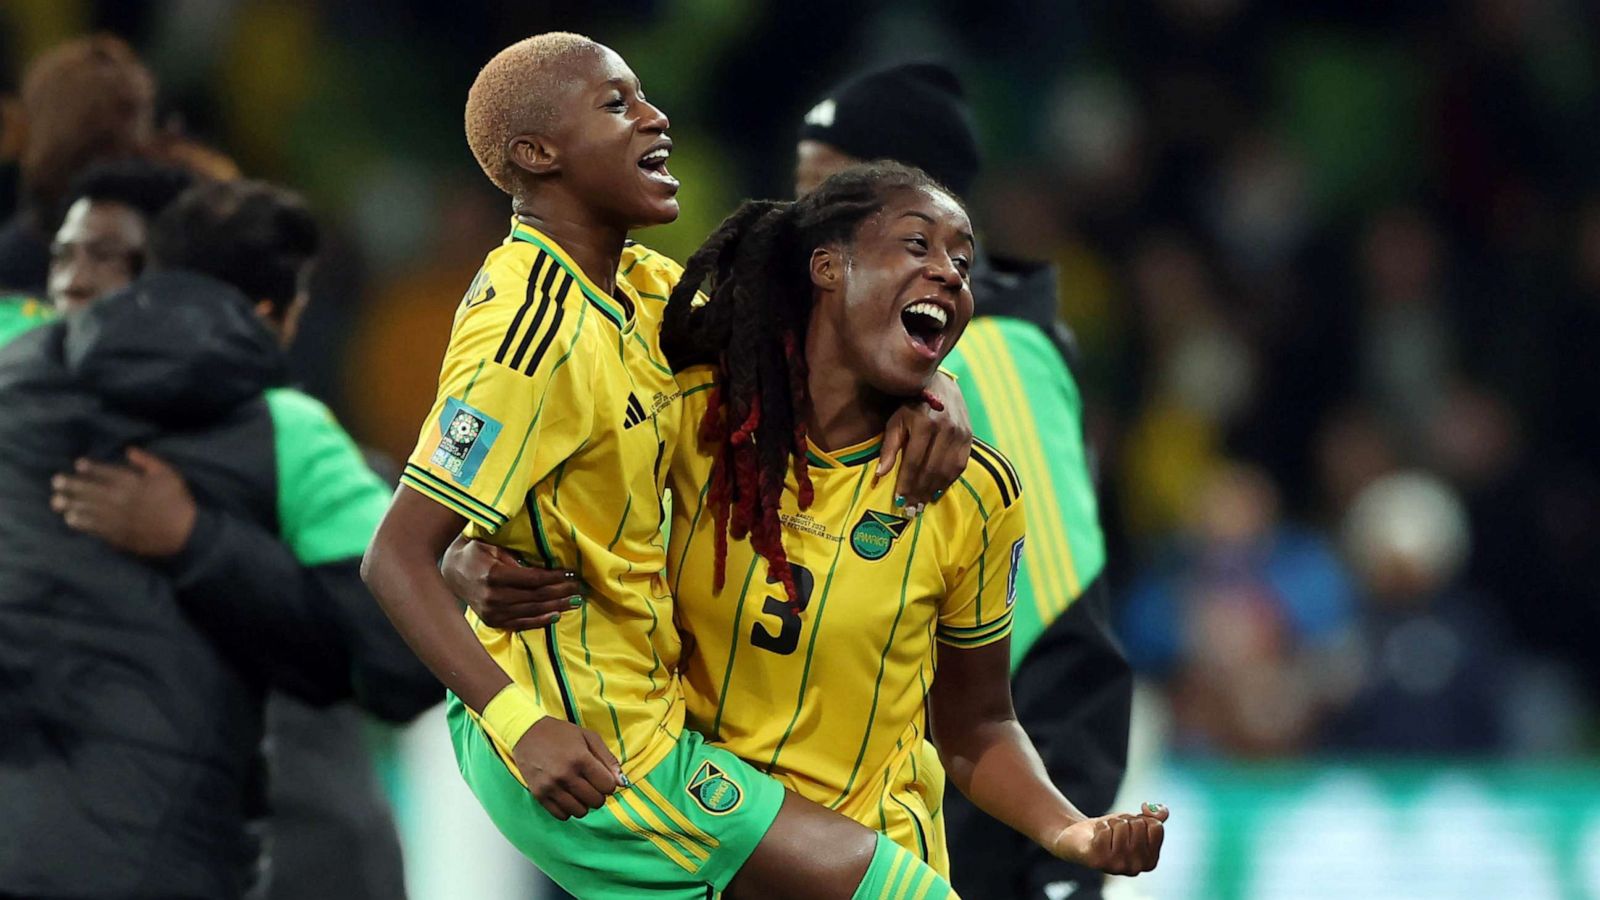 Jamaica and Colombia to battle on the pitch after partying at